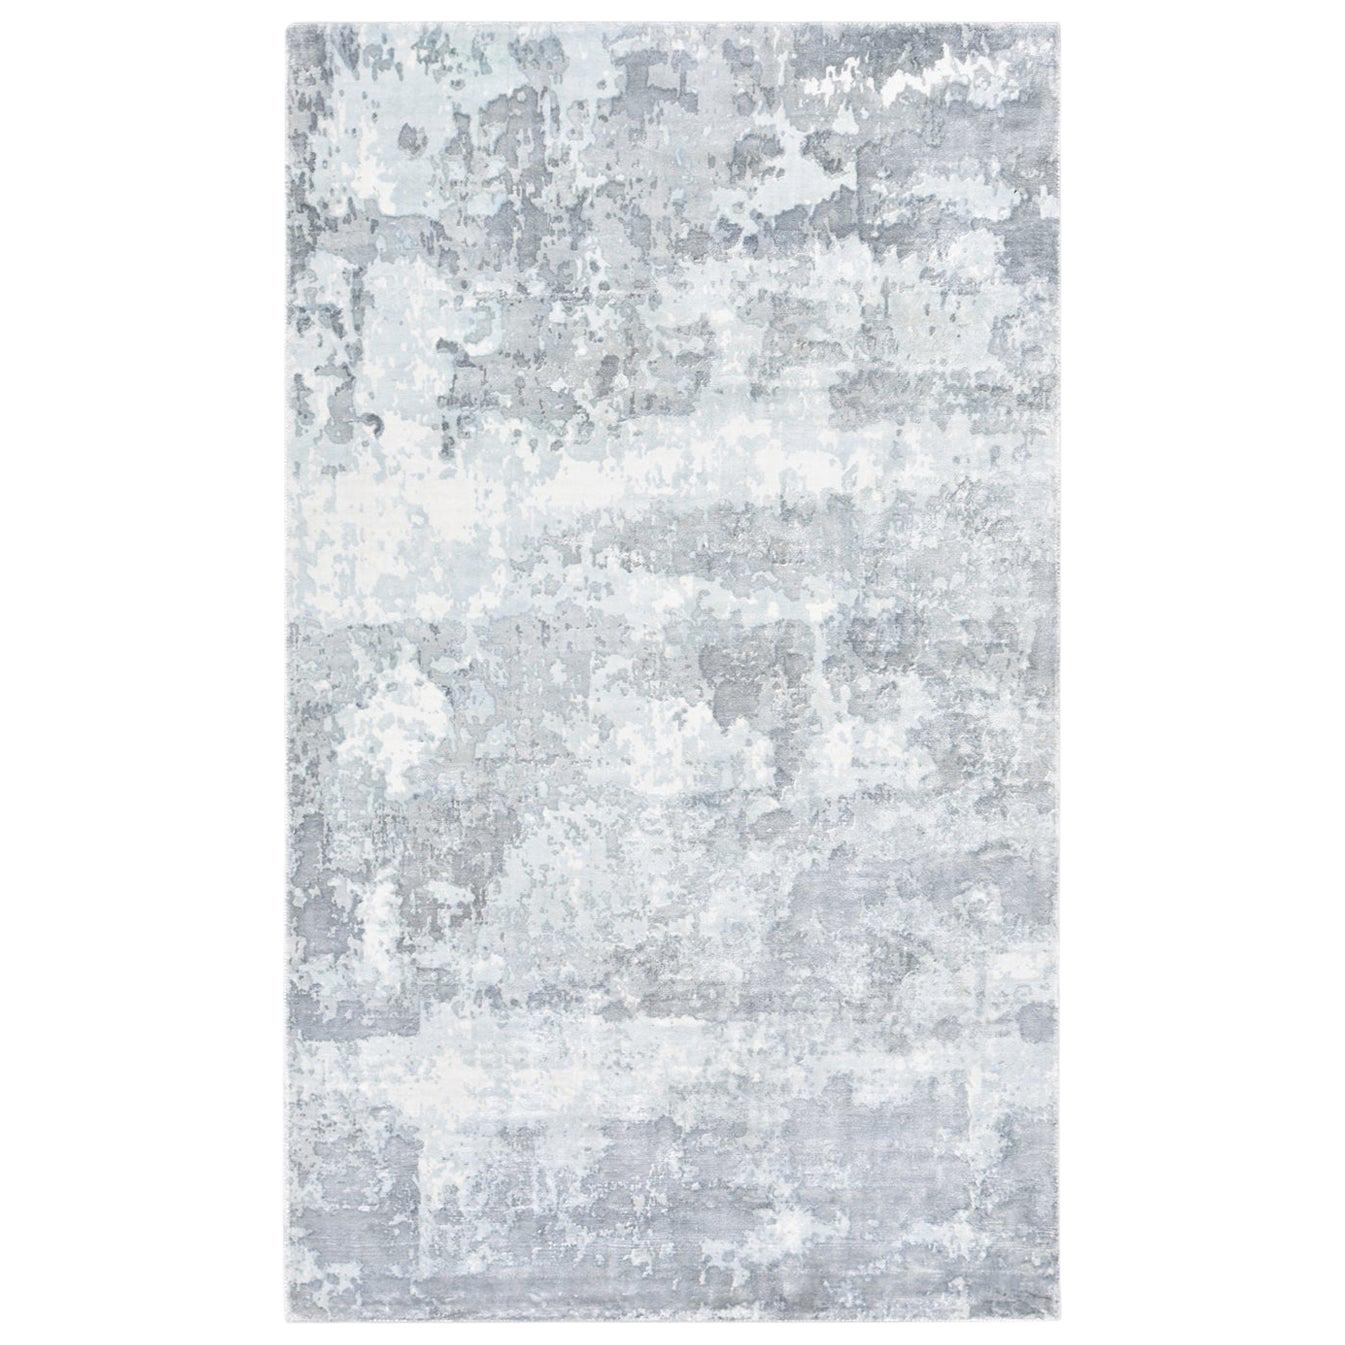 Indian Made Handmade Contemporary Abstract Area Rug